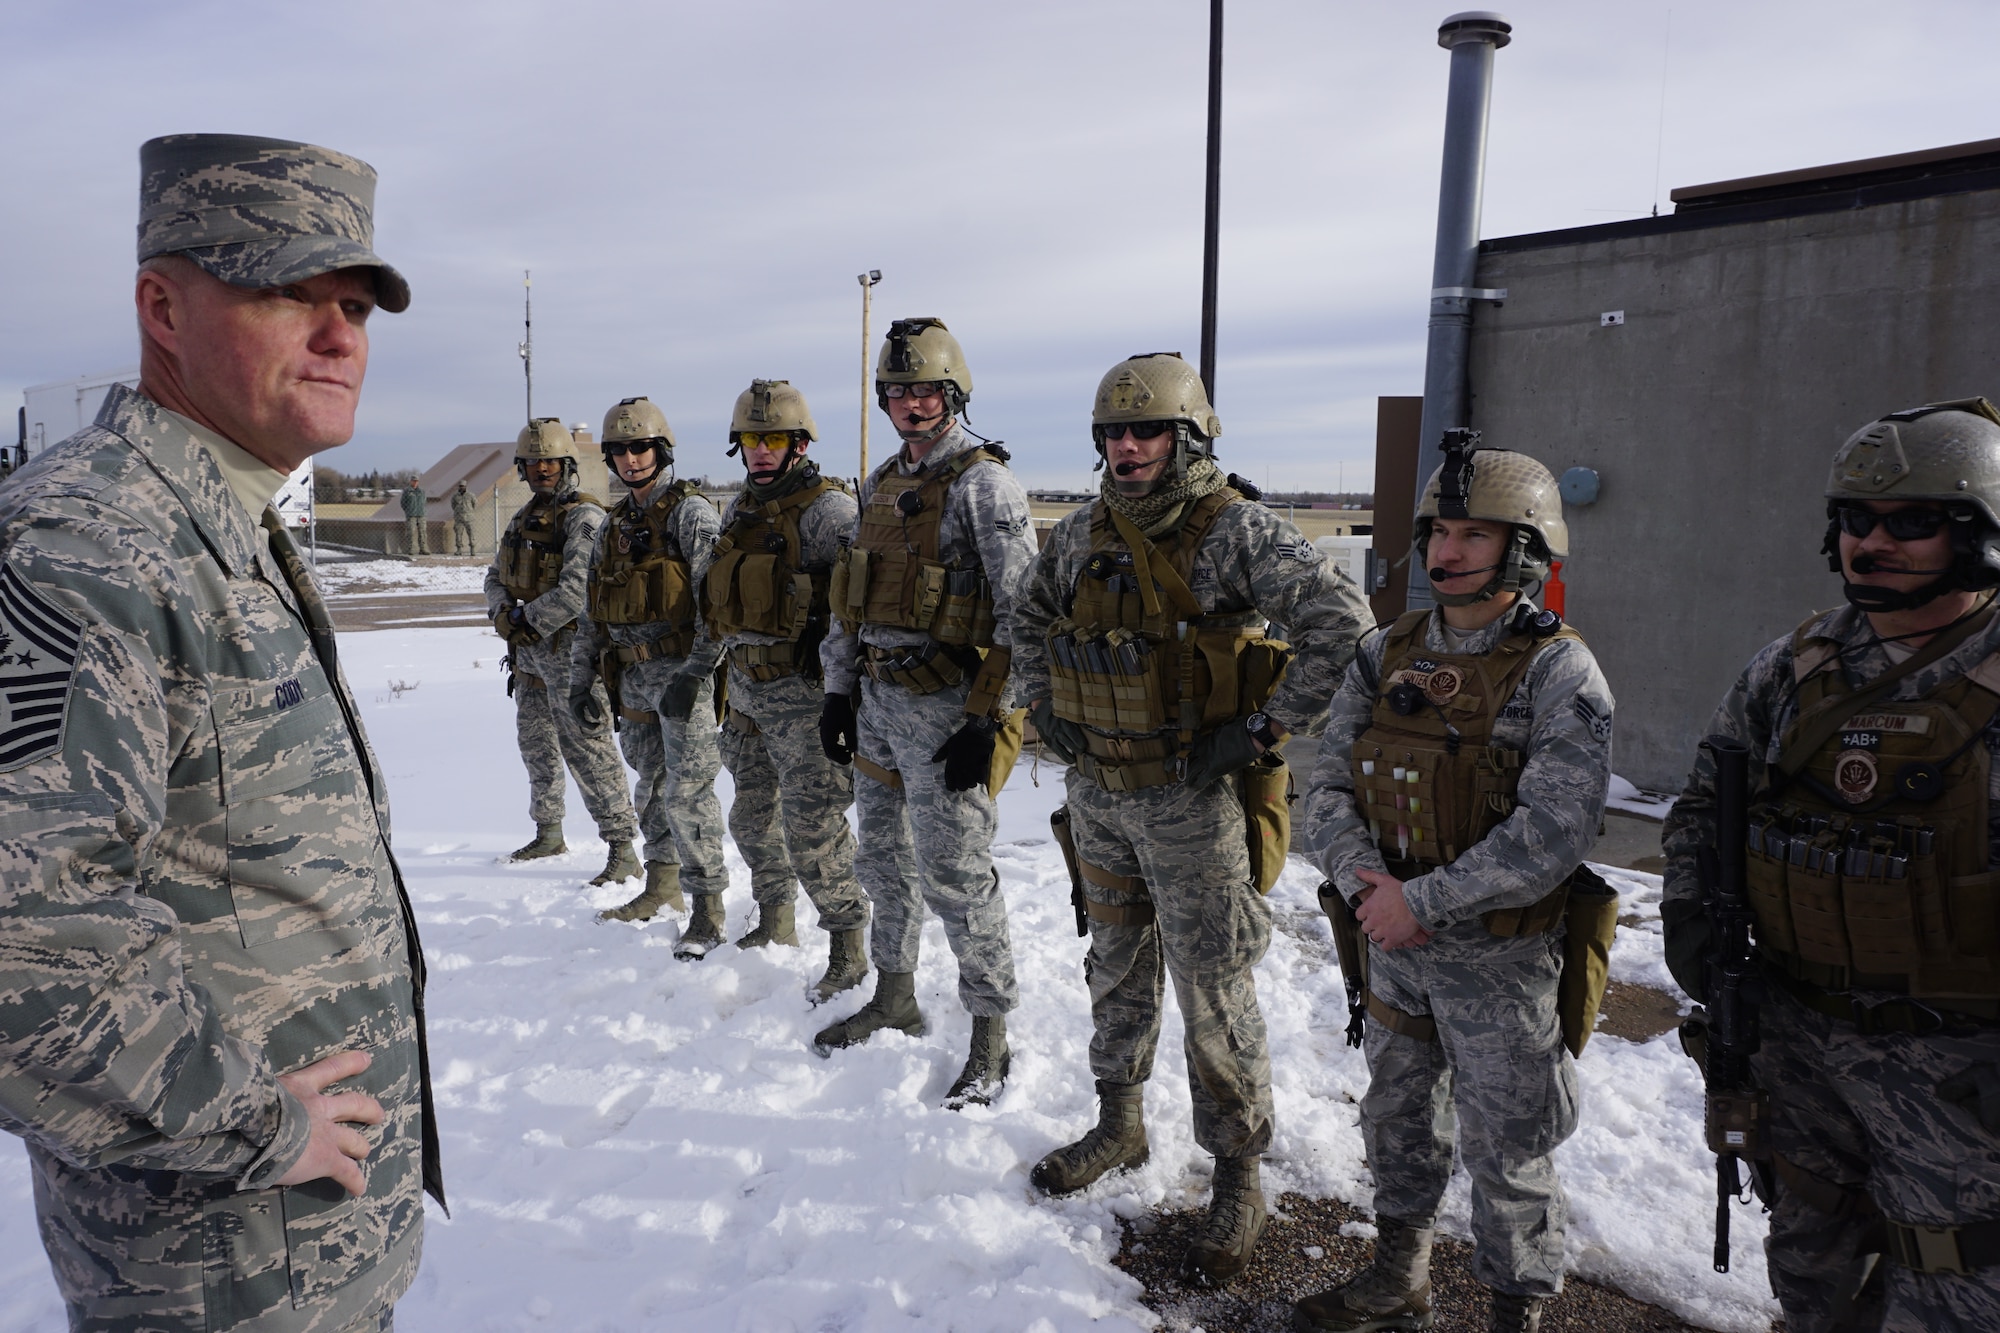 Chief Master Sgt. of the Air Force James Cody speaks with 90th Security Forces Group Tactical Response Force Airmen after they demonstrated their capabilities at the U-01 training launch facility Nov. 14, 2014, at F.E. Warren Air Force Base, Wyo. Cody said that TRF Airmen must be ready and alert every day, as their preparedness is vital to our nuclear deterrence mission. (U.S. Air Force photo/Lan Kim)